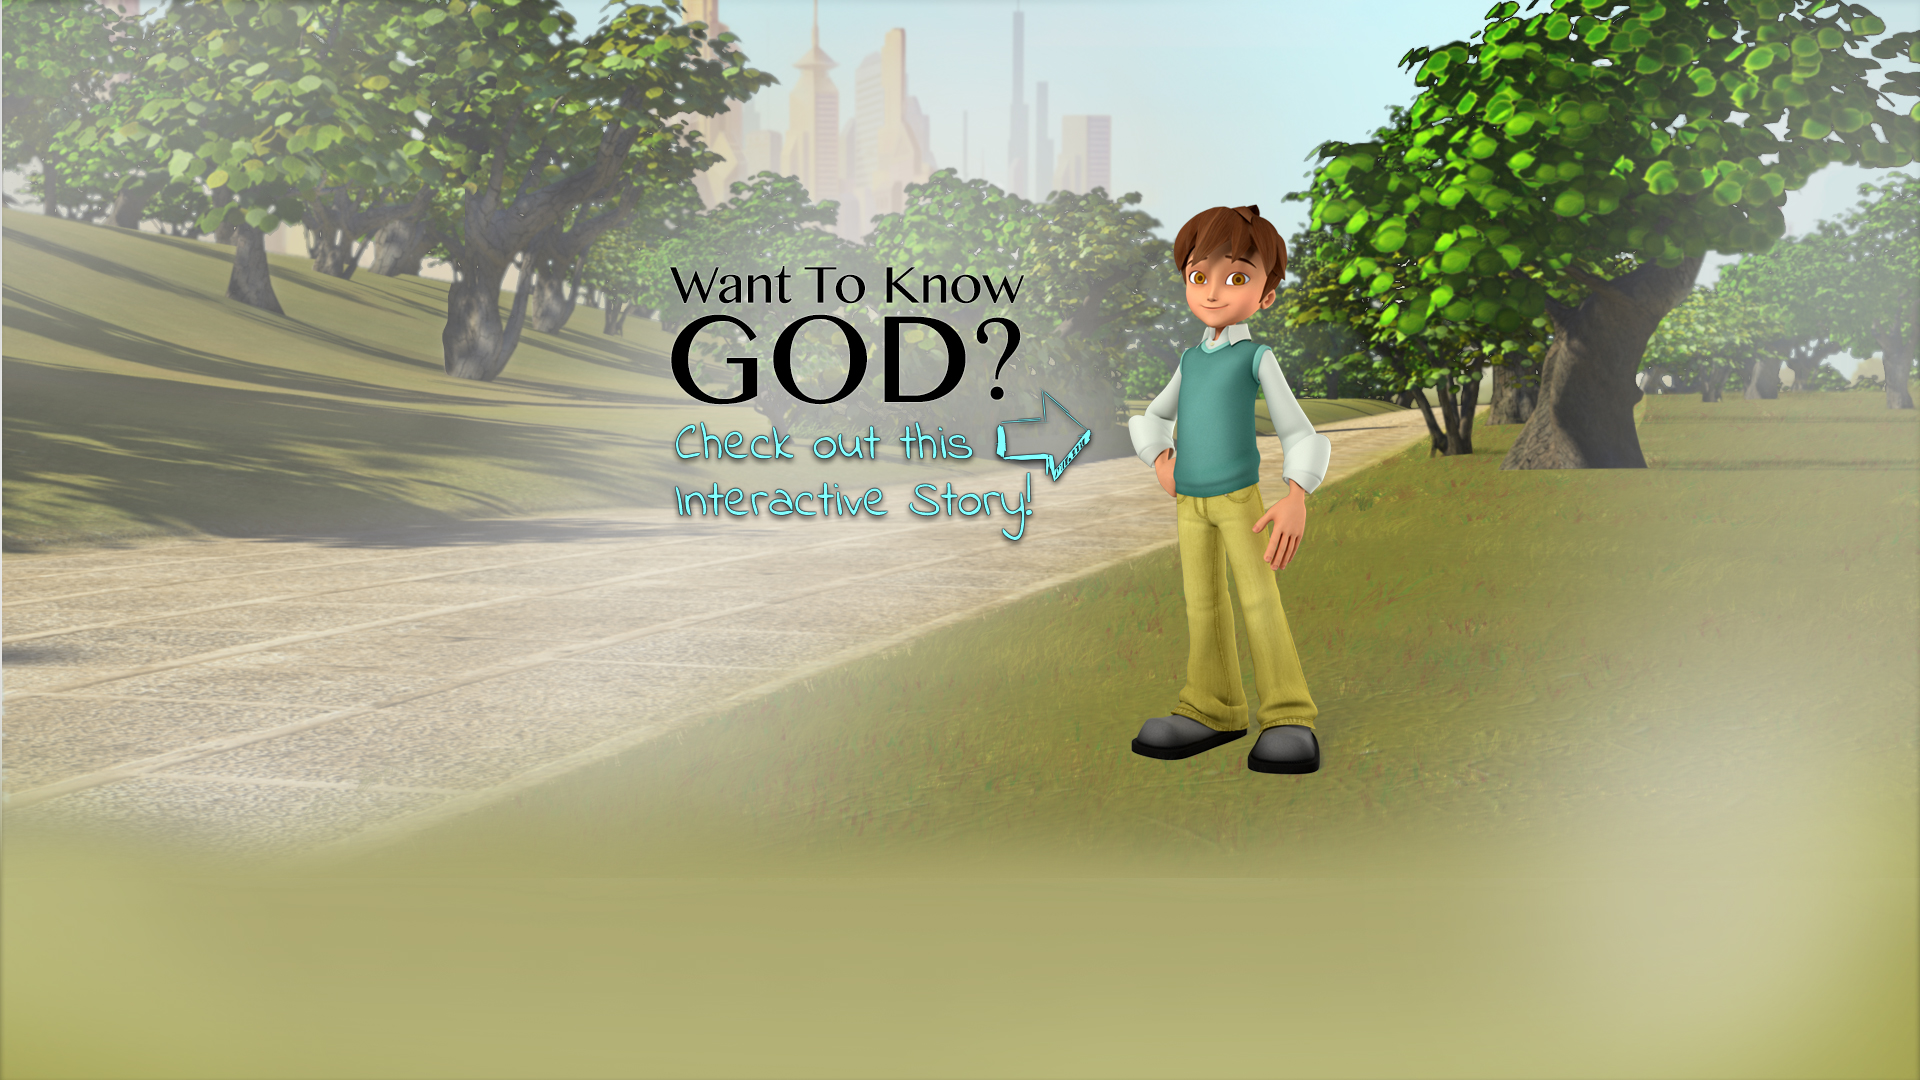 Free Christian Computer Games - Online Games with Biblical Themes.